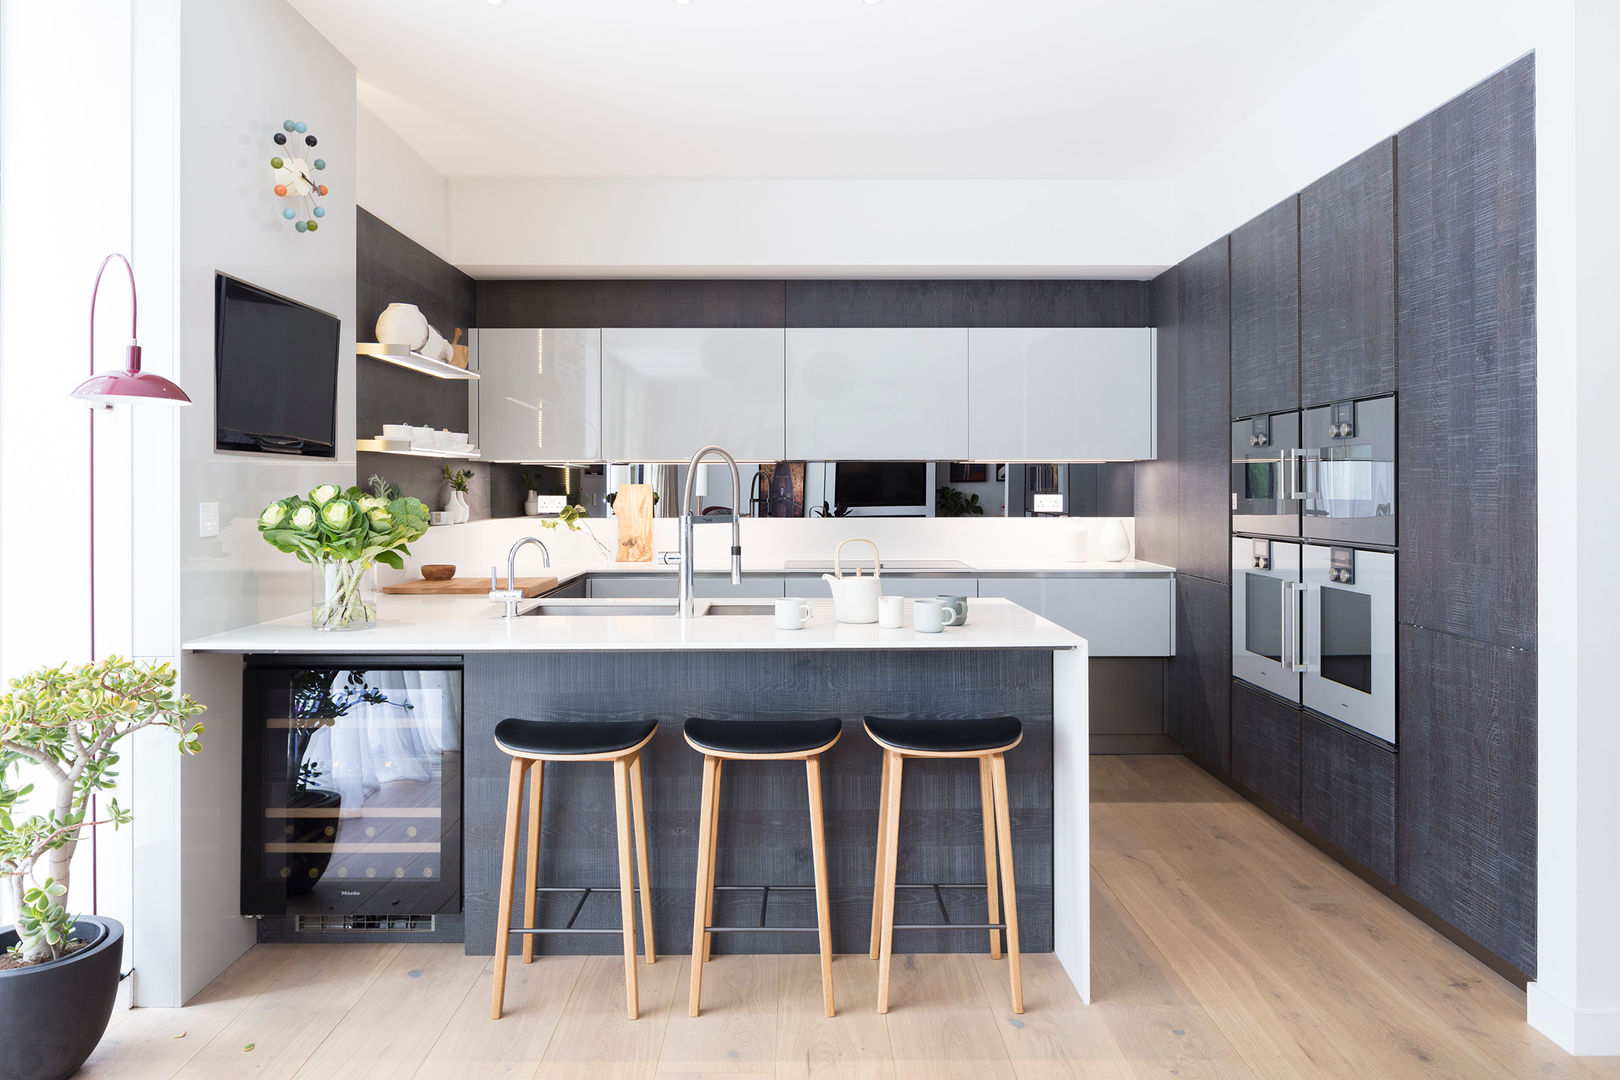 Modern New Home in Hampstead - kitchen bar Black and Milk | Interior Design | London Dining room kitchen bar,kitchen,bar stool,black kitchen